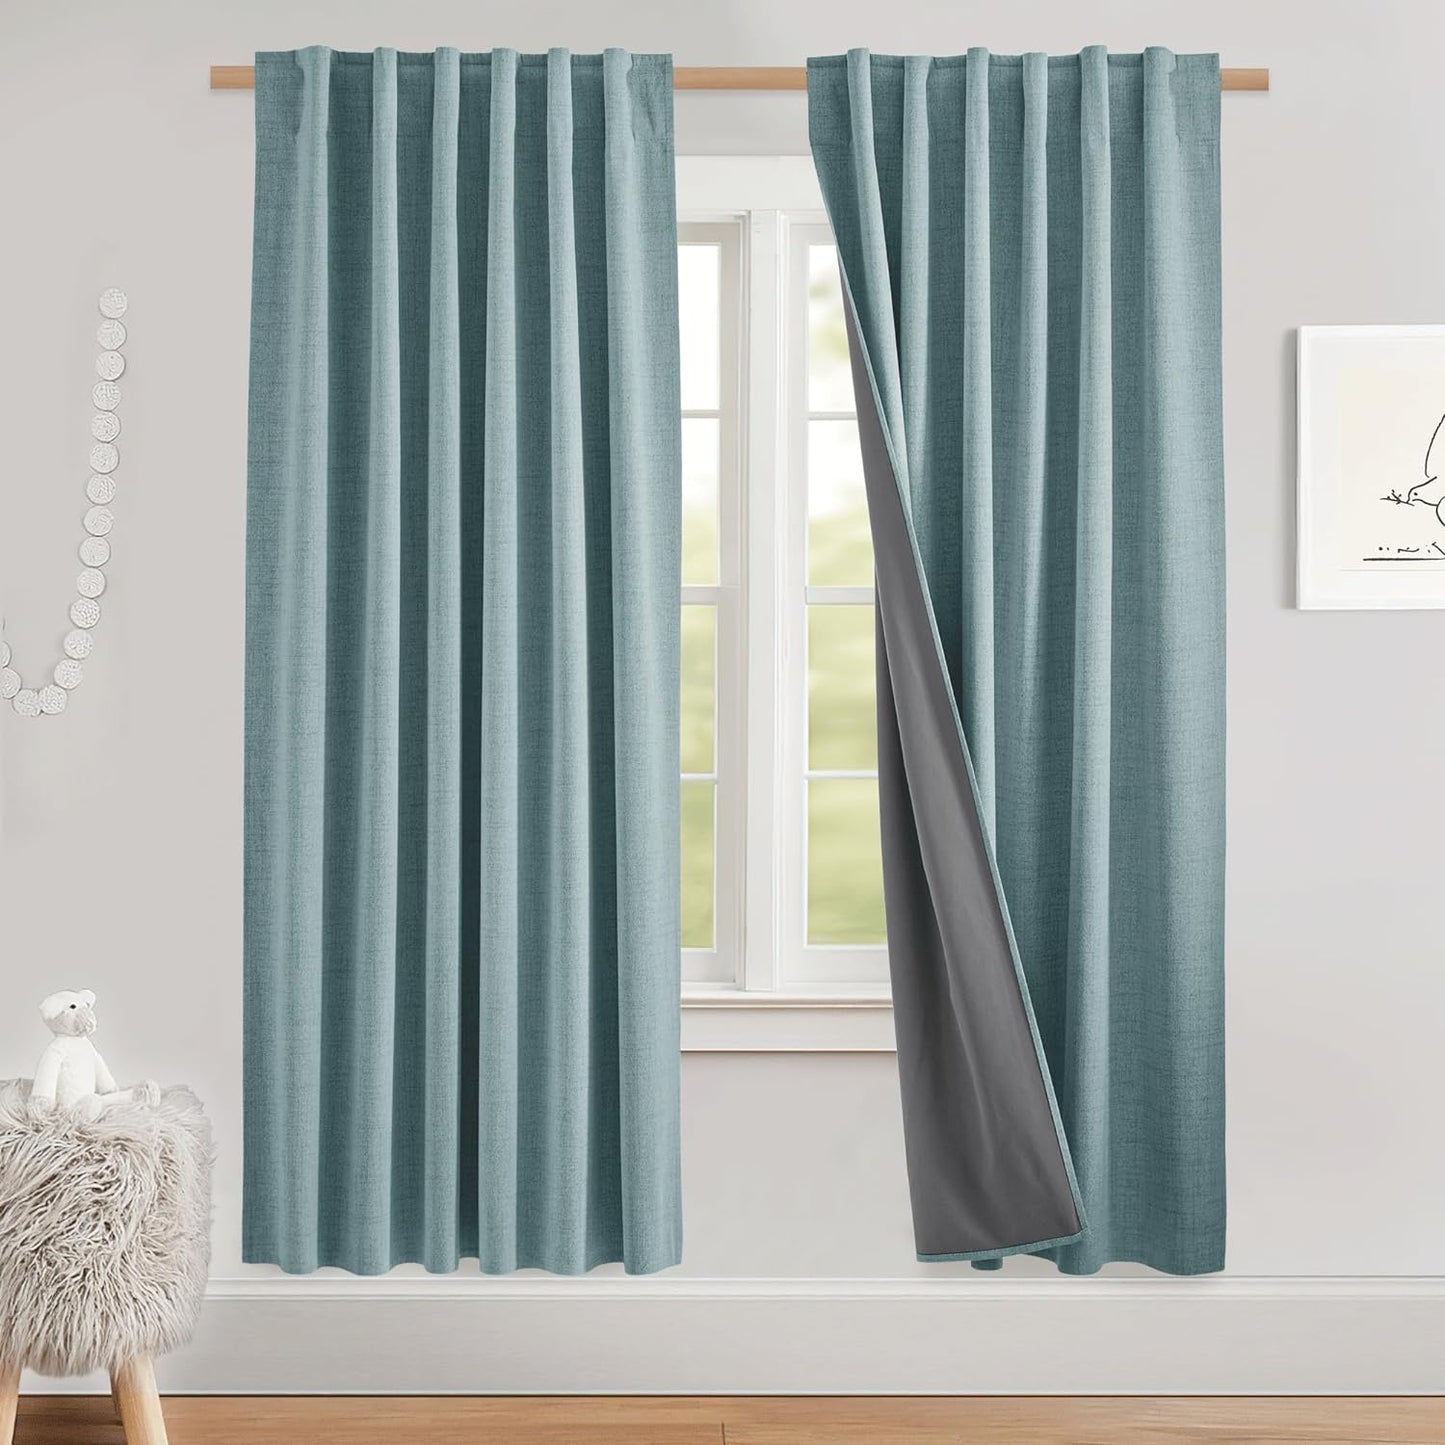 NICETOWN 100% Blackout Linen Curtains for Living Room with Thermal Insulated White Liner, Ivory, 52" Wide, 2 Panels, 84" Long Drapes, Back Tab Retro Linen Curtains Vertical Drapes Privacy for Bedroom  NICETOWN Skylark Blue W52 X L72 